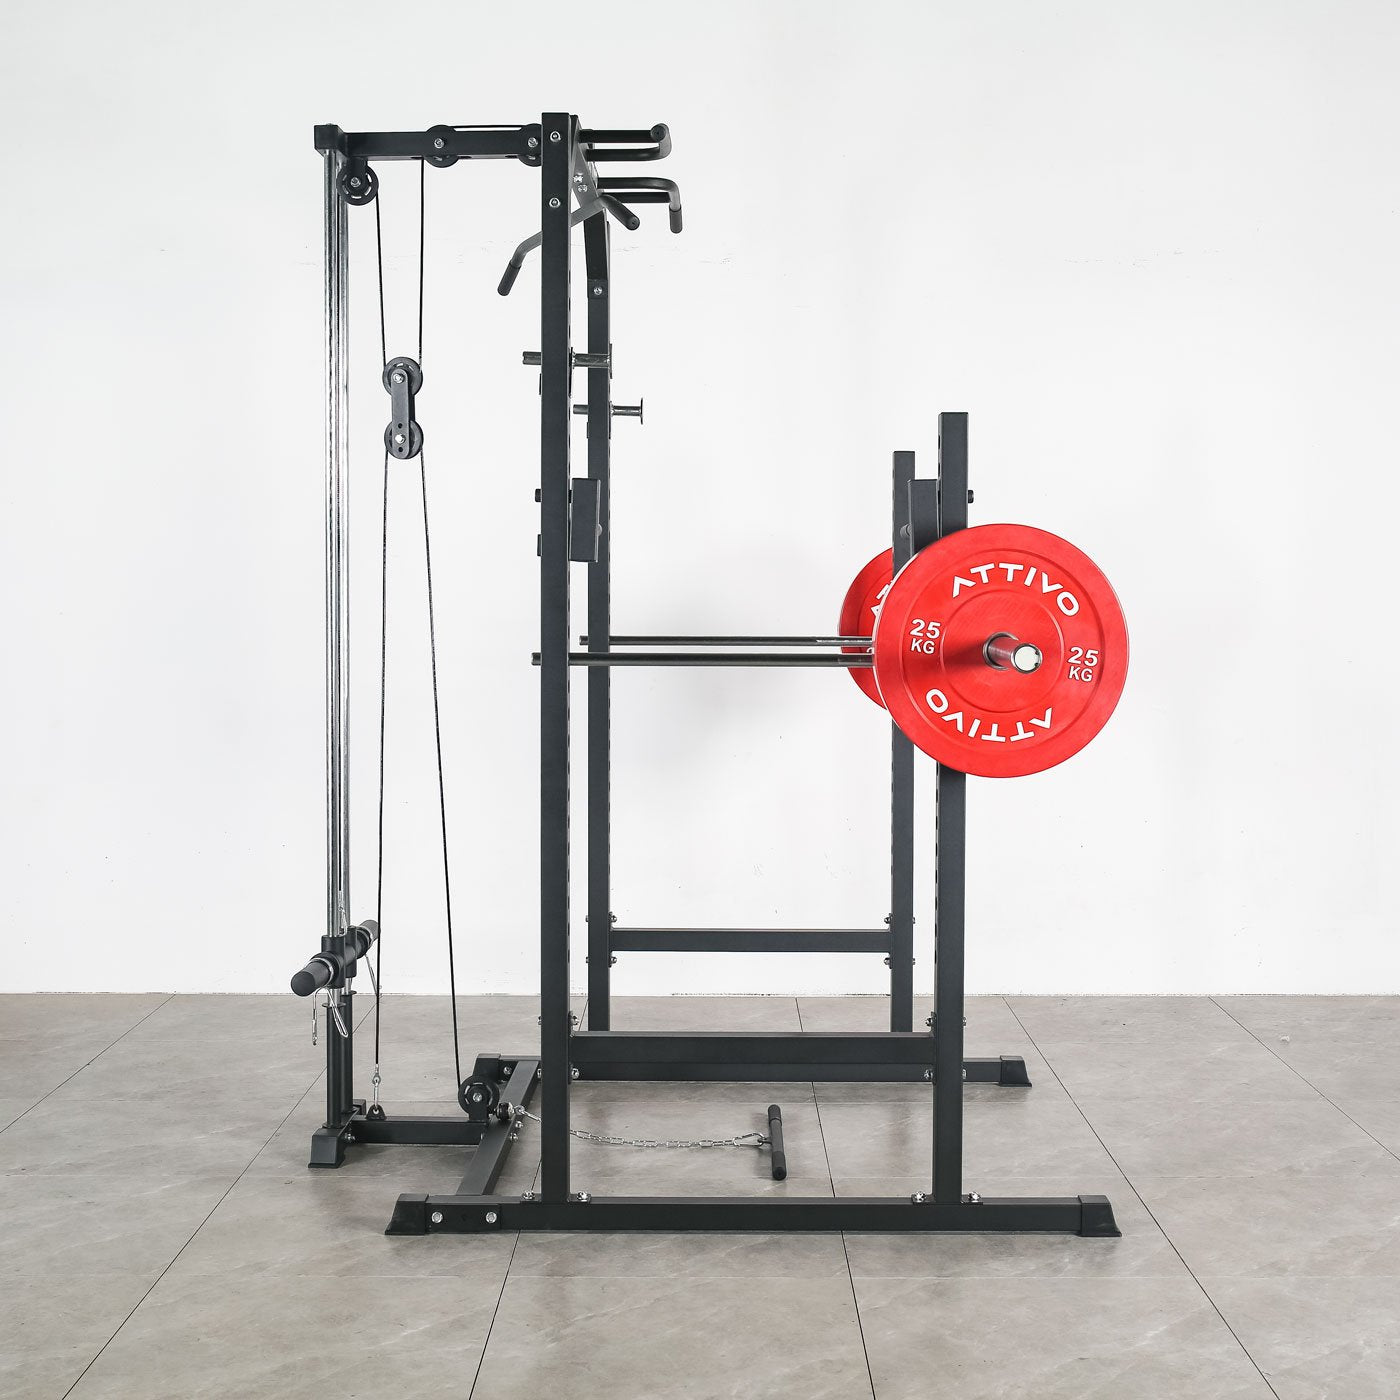 ATTIVO L2 Heavy Duty Half Power Cage Weight Lifting Squat Rack with Lat Pull Down System